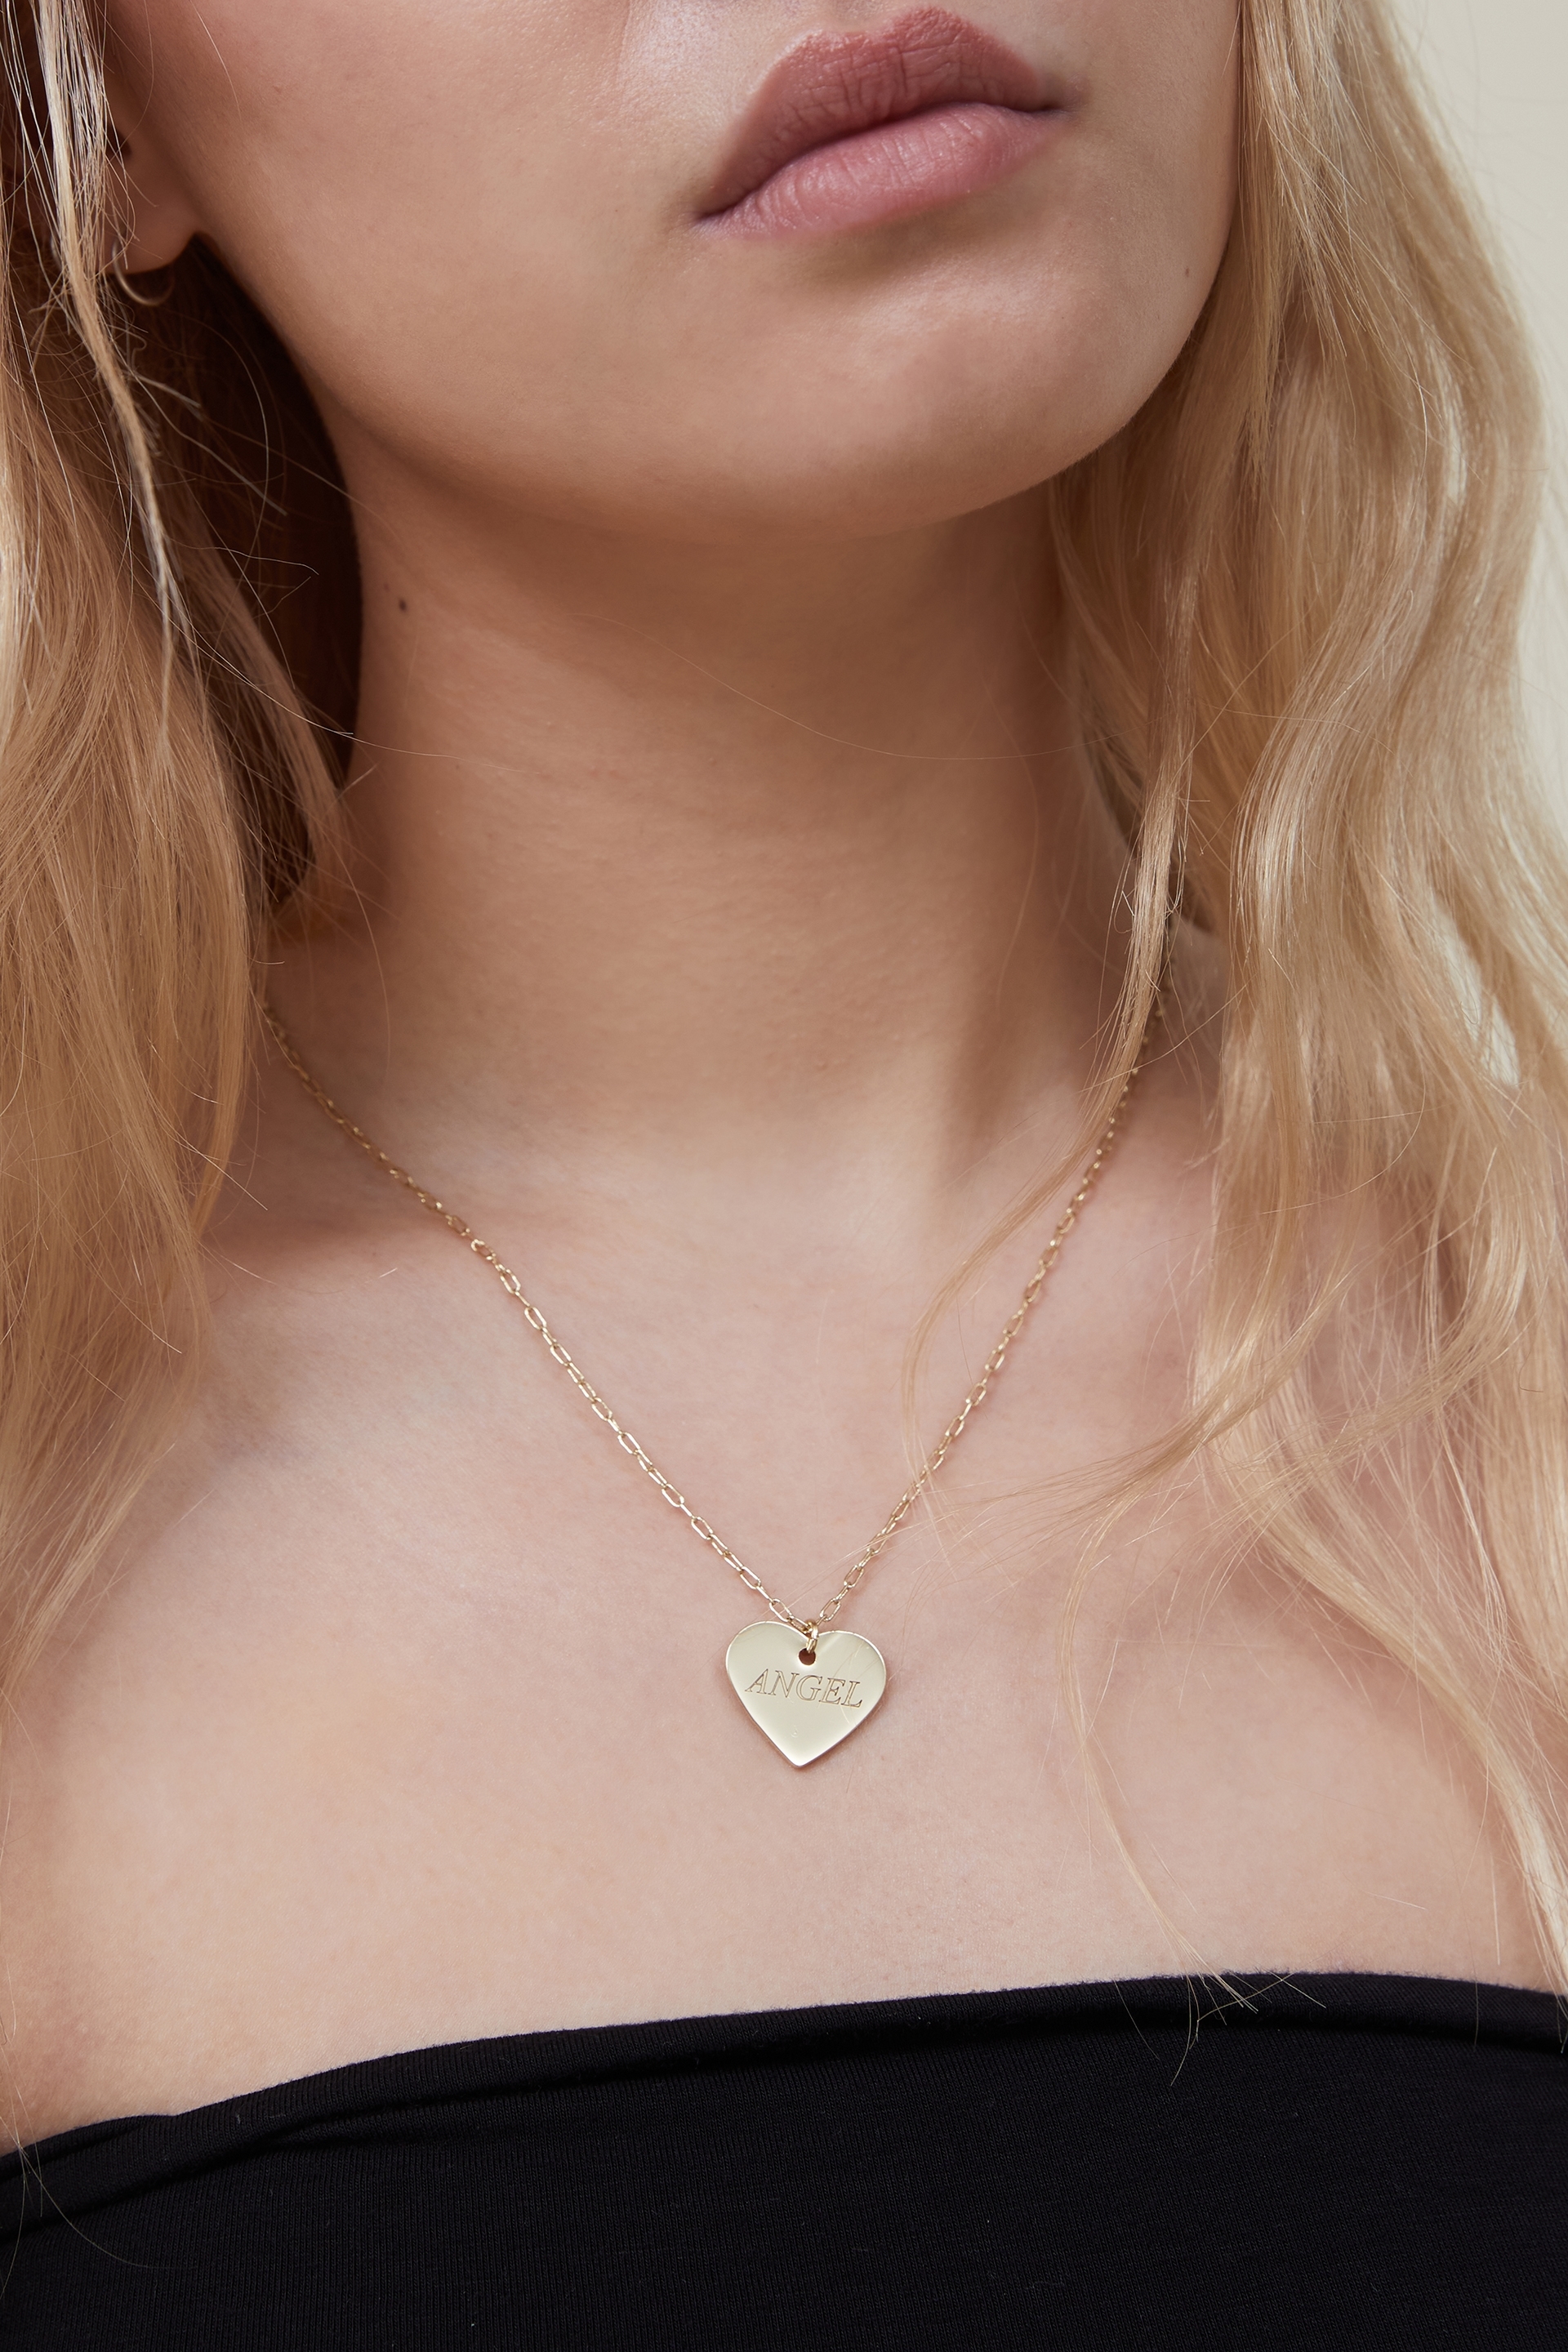 Rubi - Personalised Premium Pendant Necklace Gold Plated - Gold plated heart